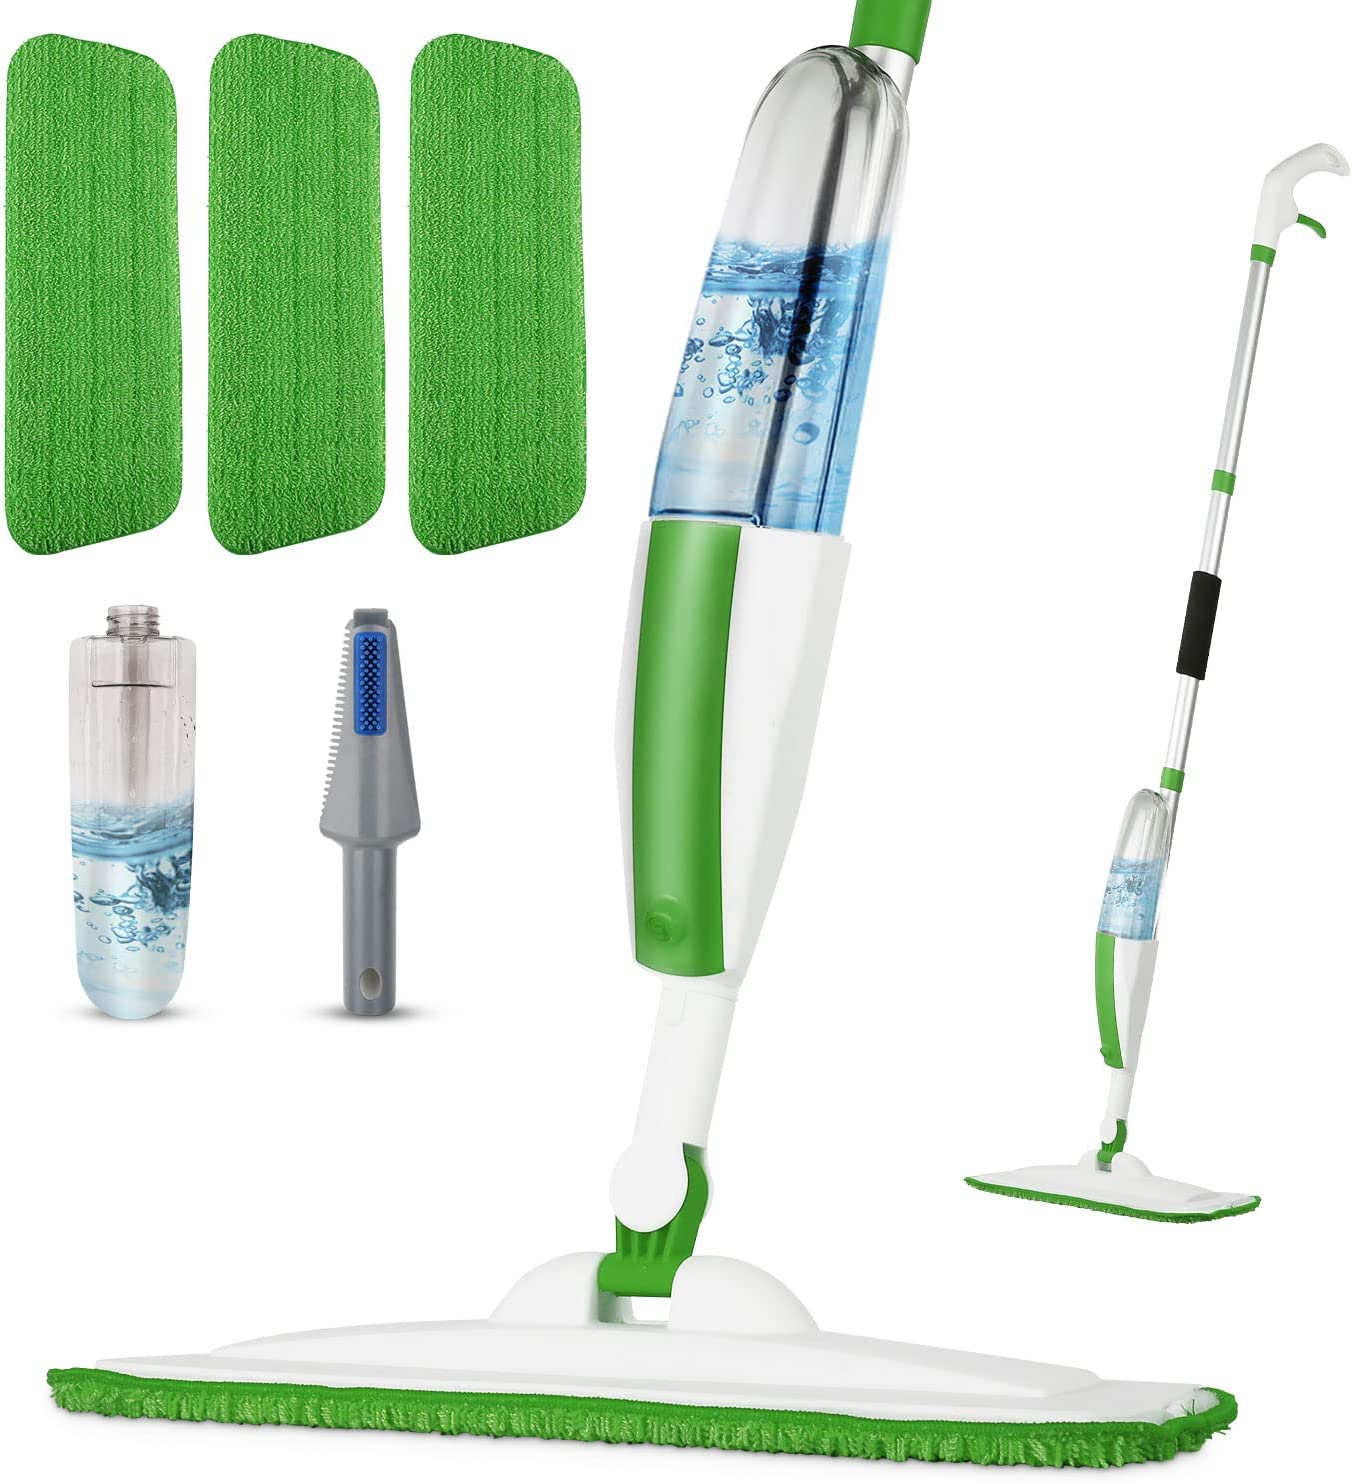 Mops for Floor Cleaning Microfiber Spray Mop with 3 [...]